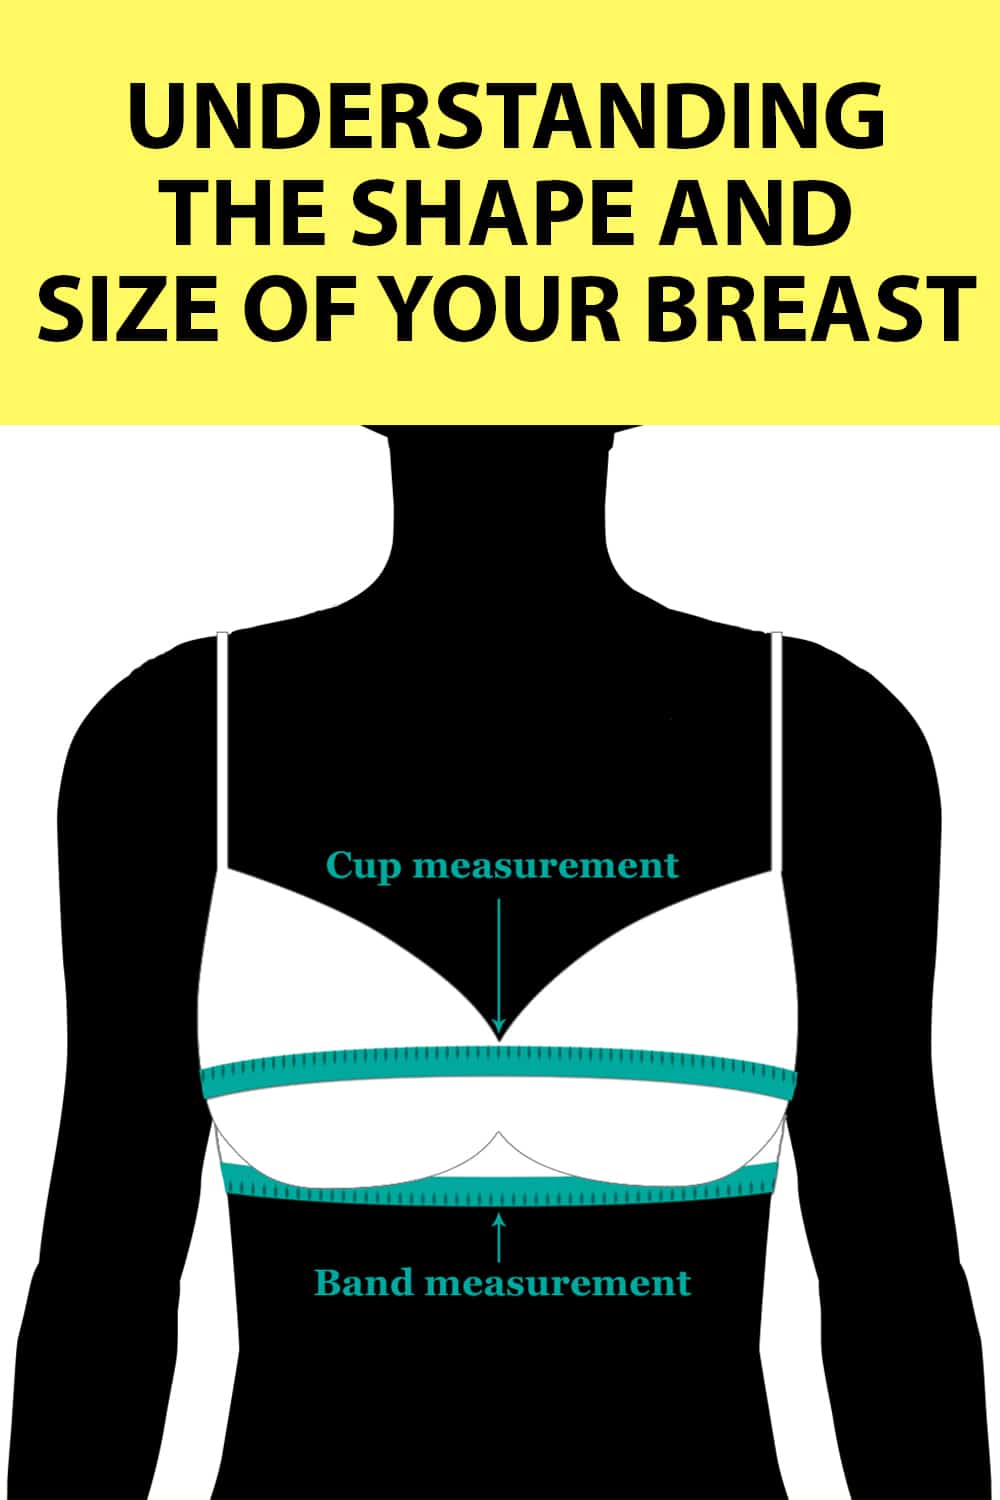 breast shapes with names